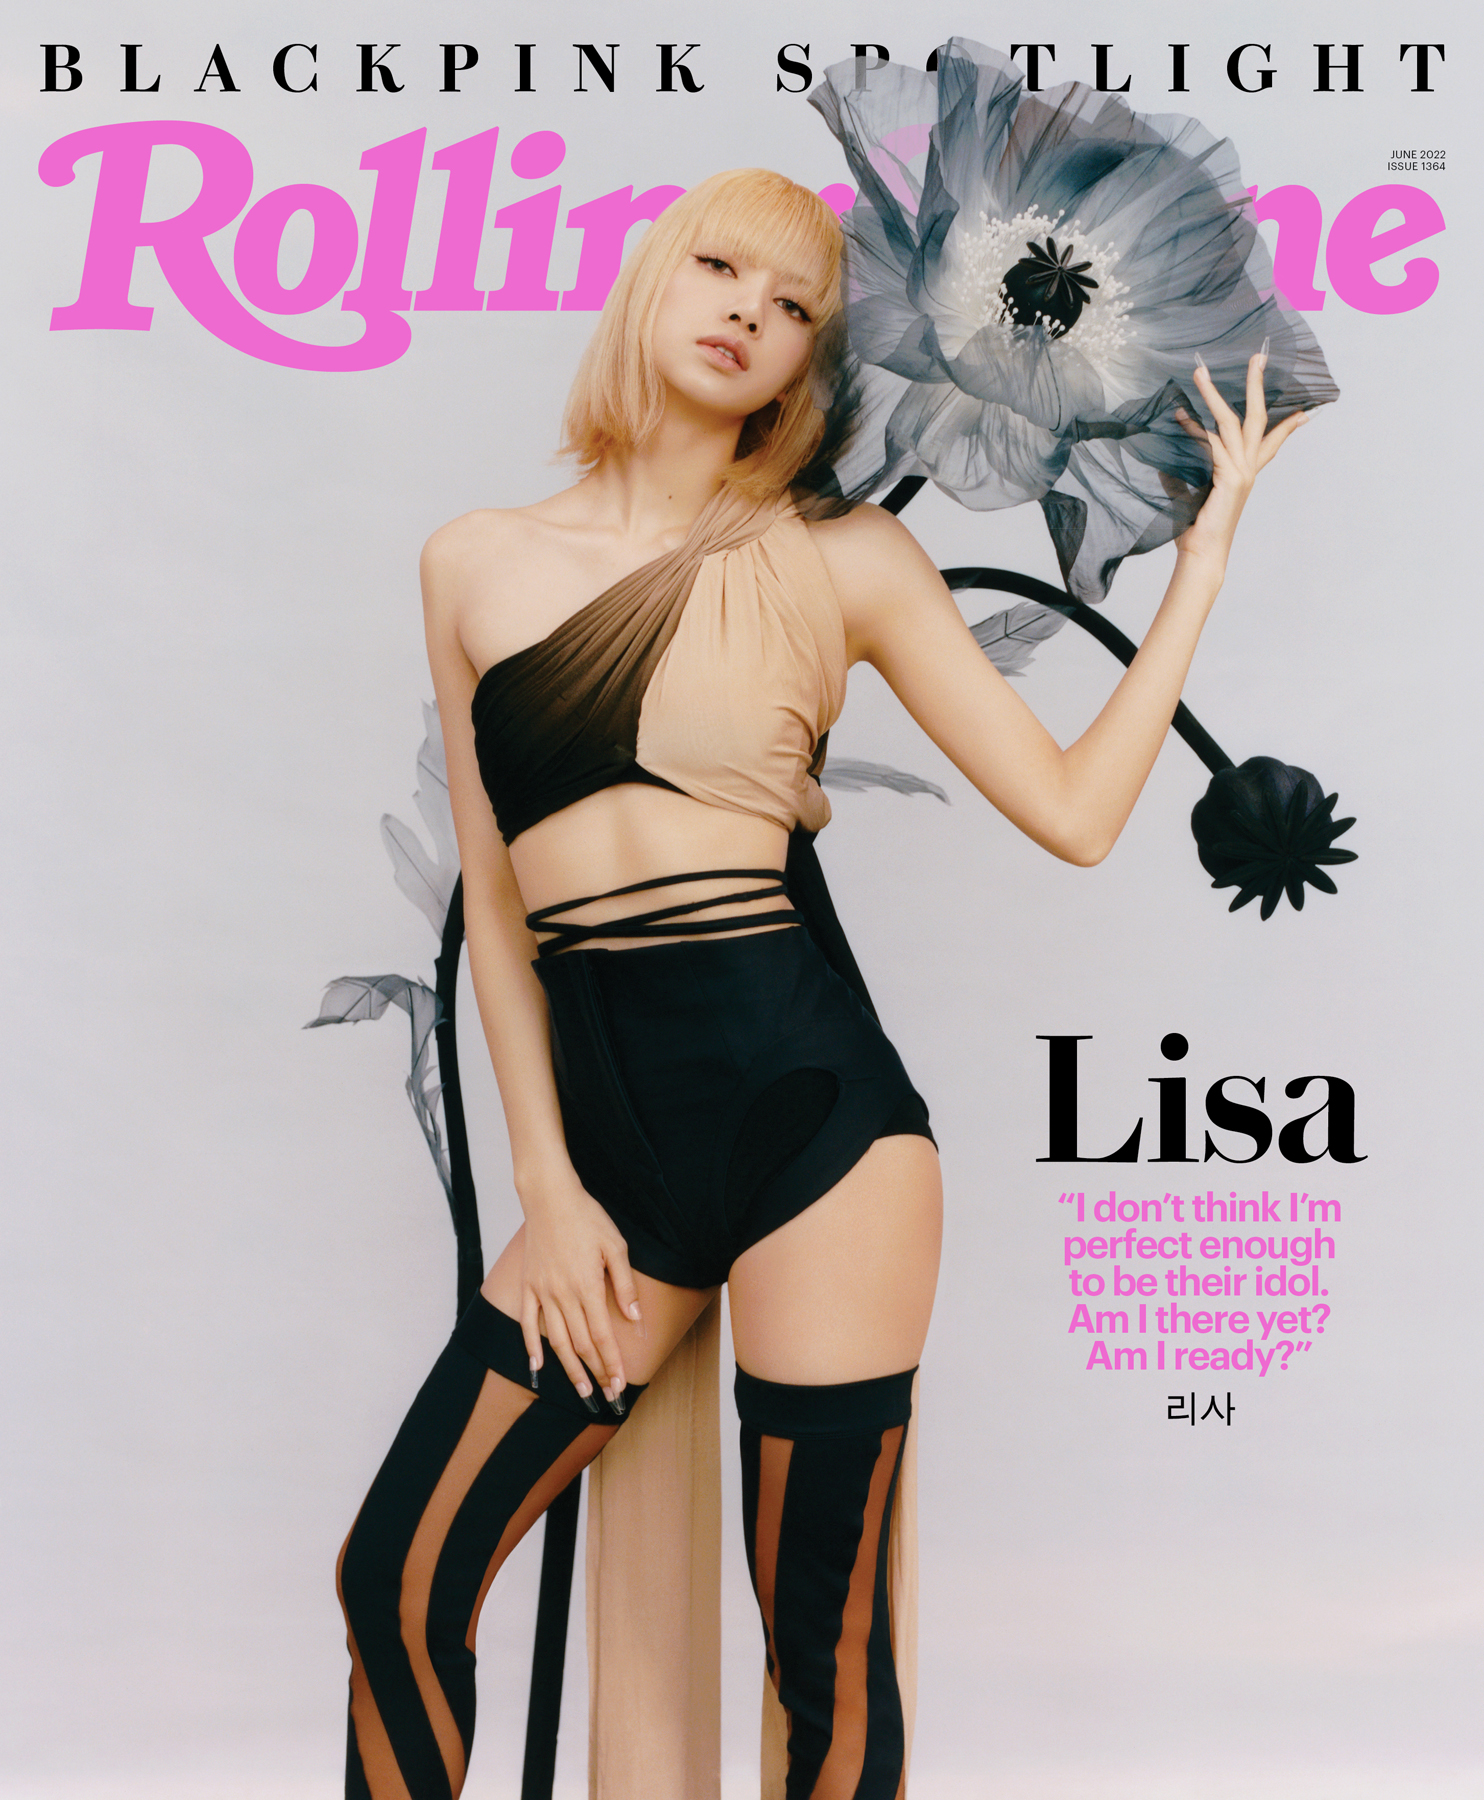 BLACKPINK for Rolling Stone Cover